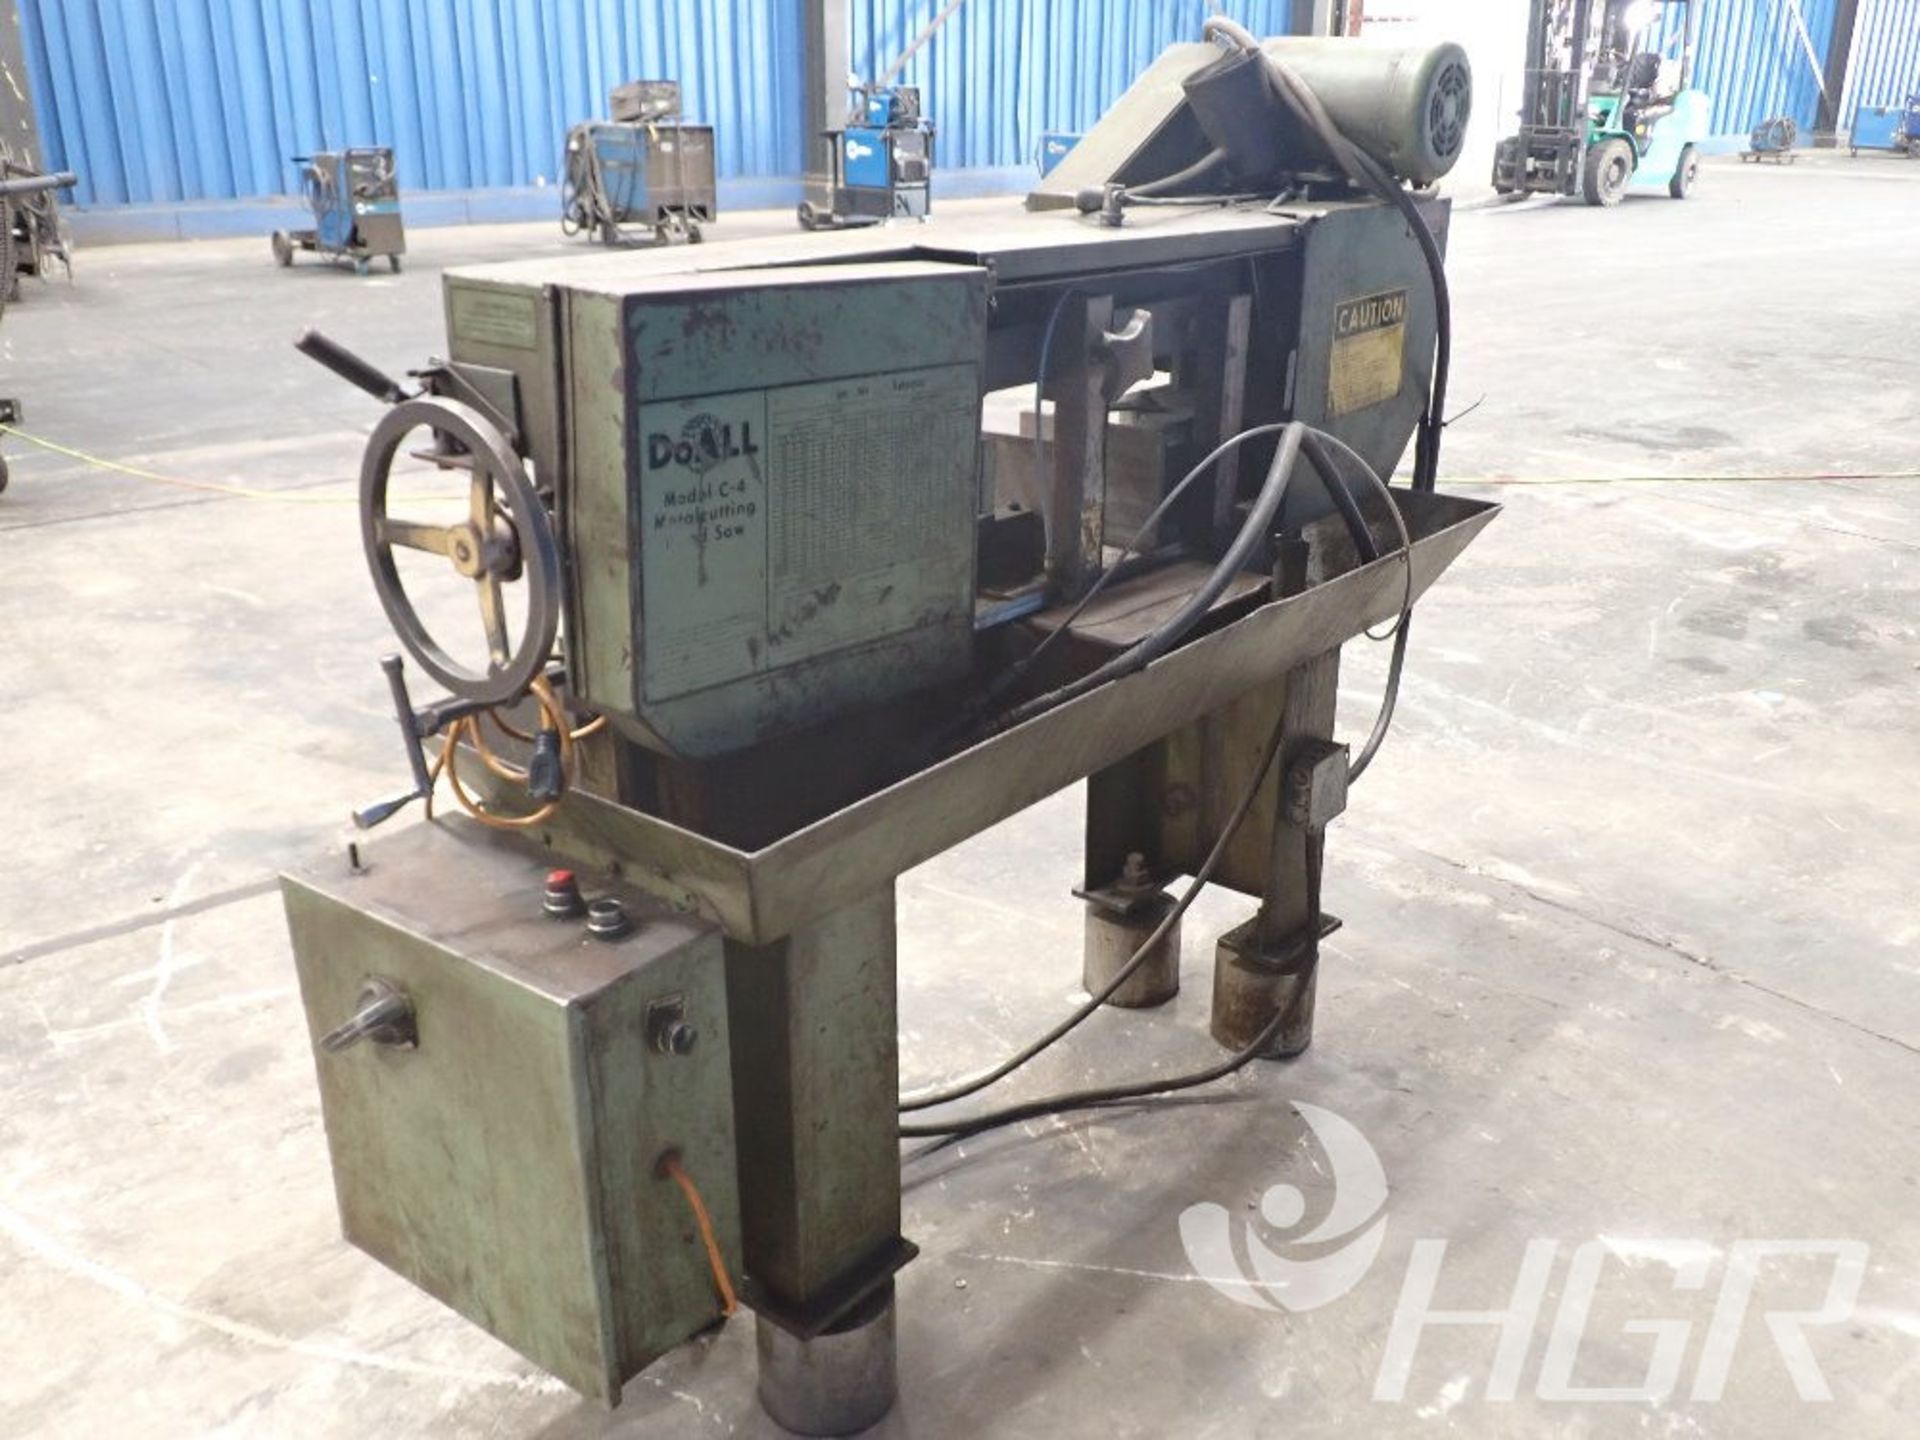 DO ALL HORIZONTAL BANDSAW, Model C-4, Date: n/a; s/n 234-773309, Approx. Capacity: 18", Power: 3/ - Image 14 of 19